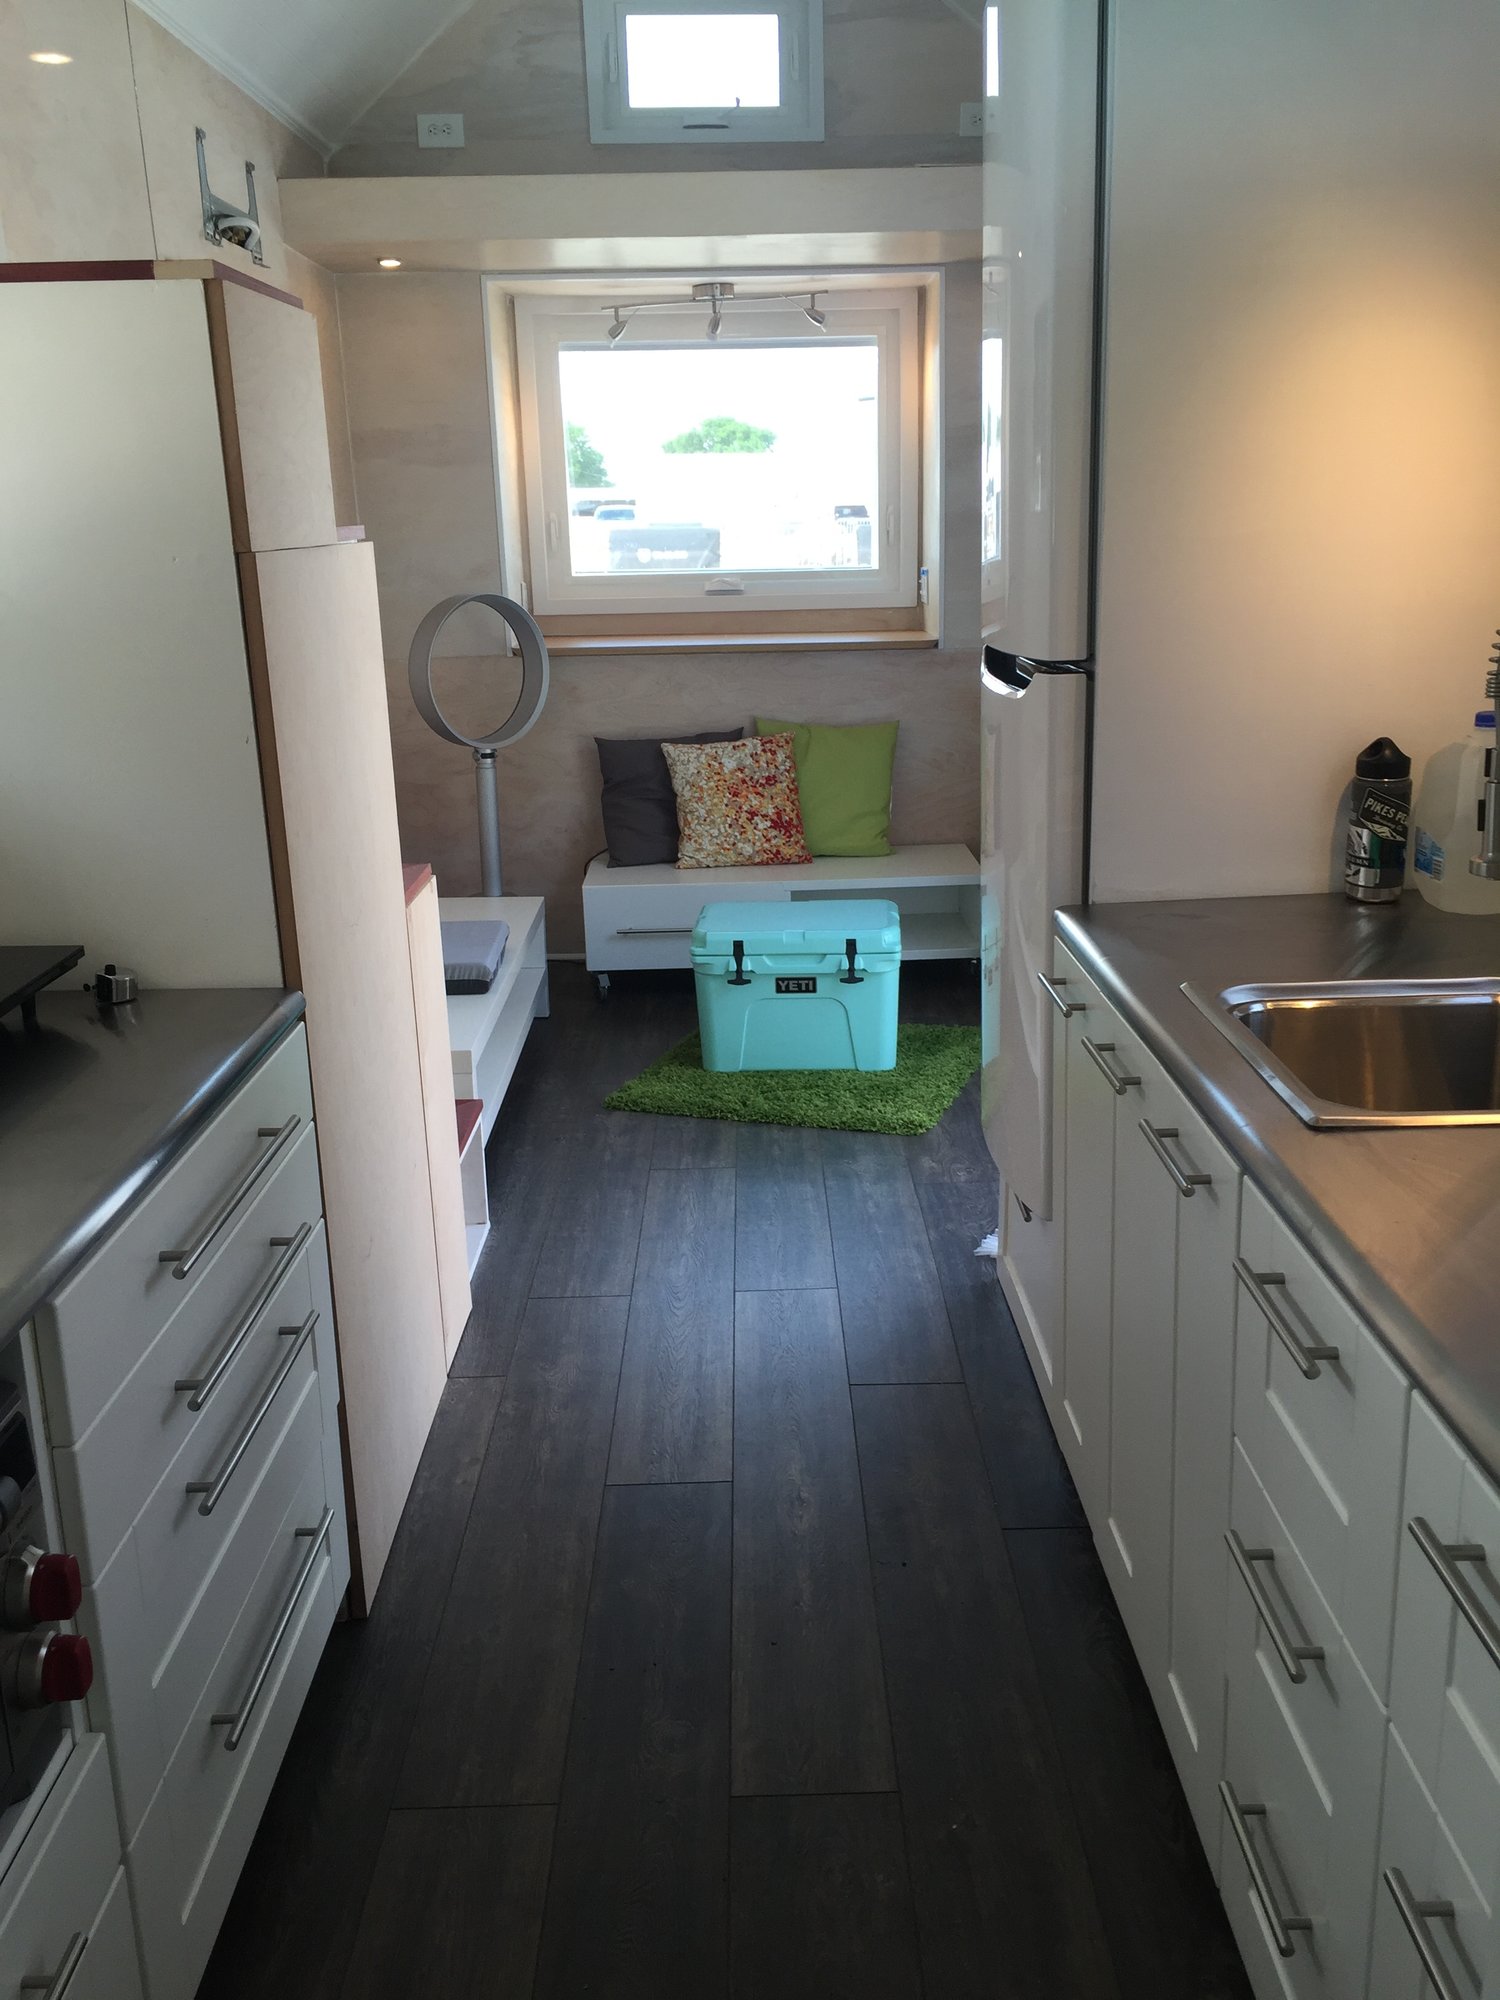 Using Ikea Cabinets In A Tiny House An In Depth Review Tiny